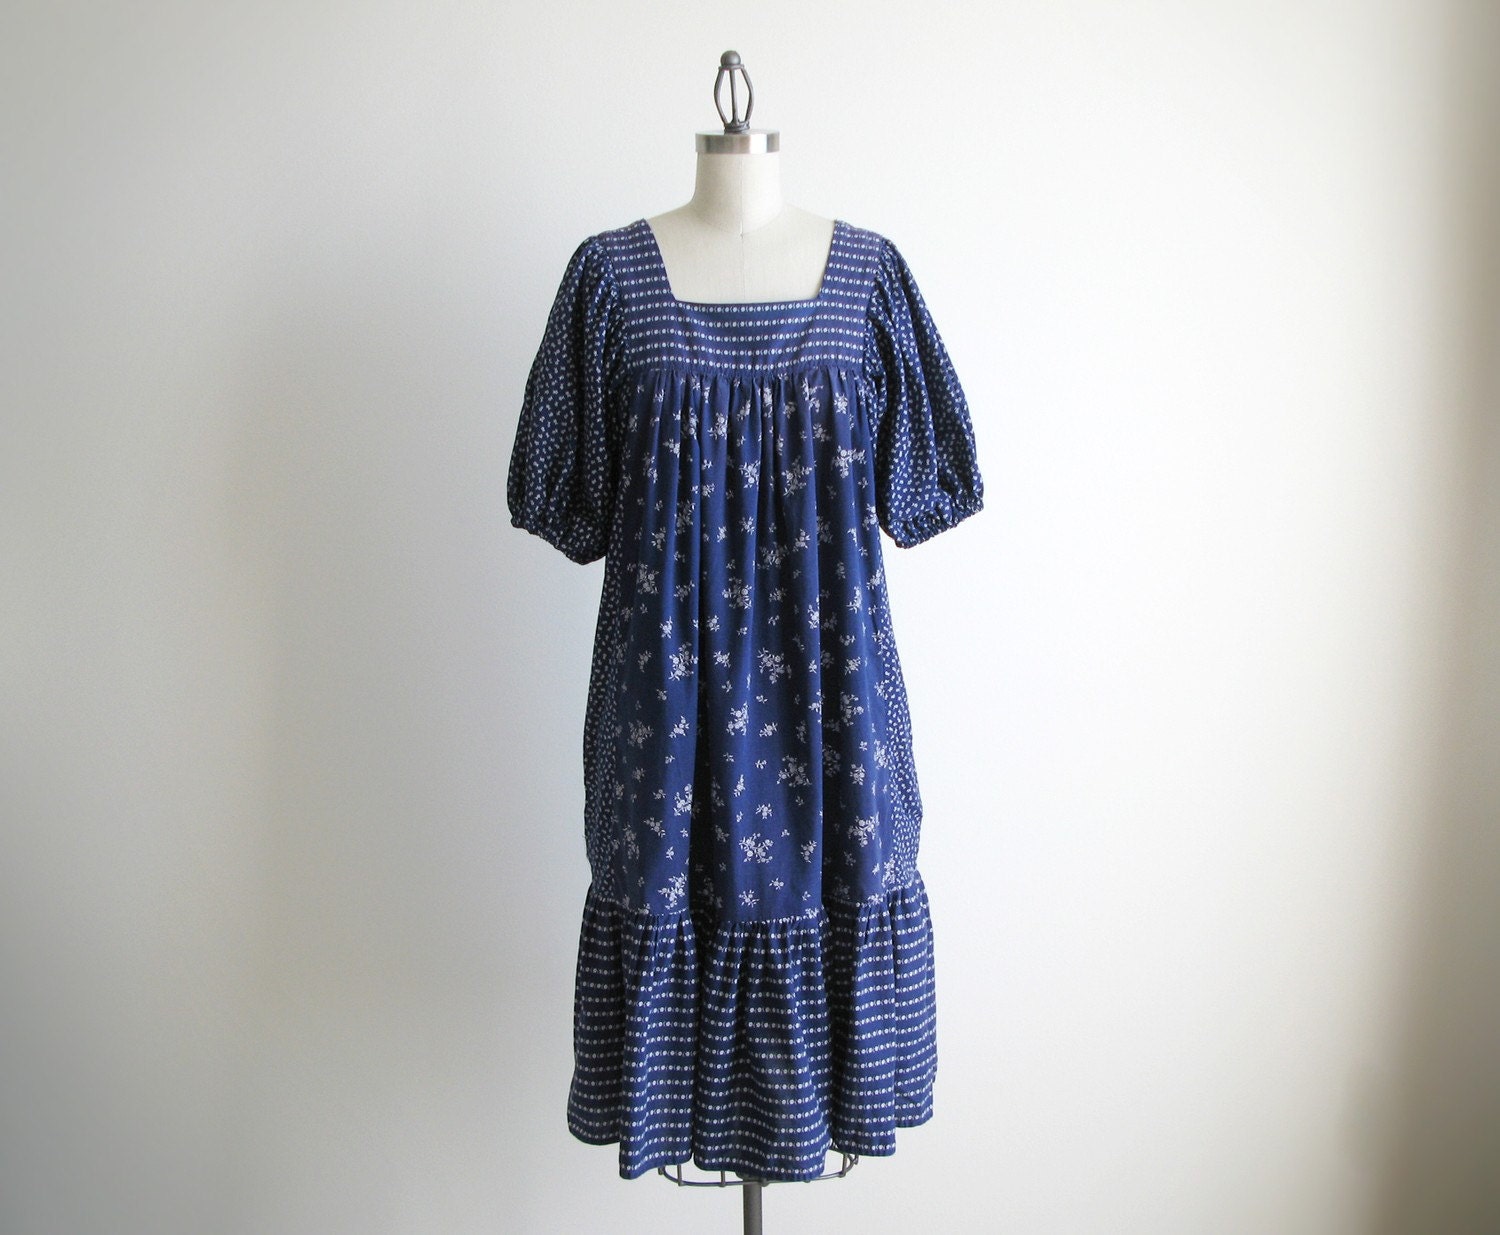 Vintage white and navy floral bohemian dress by thetailorsstories